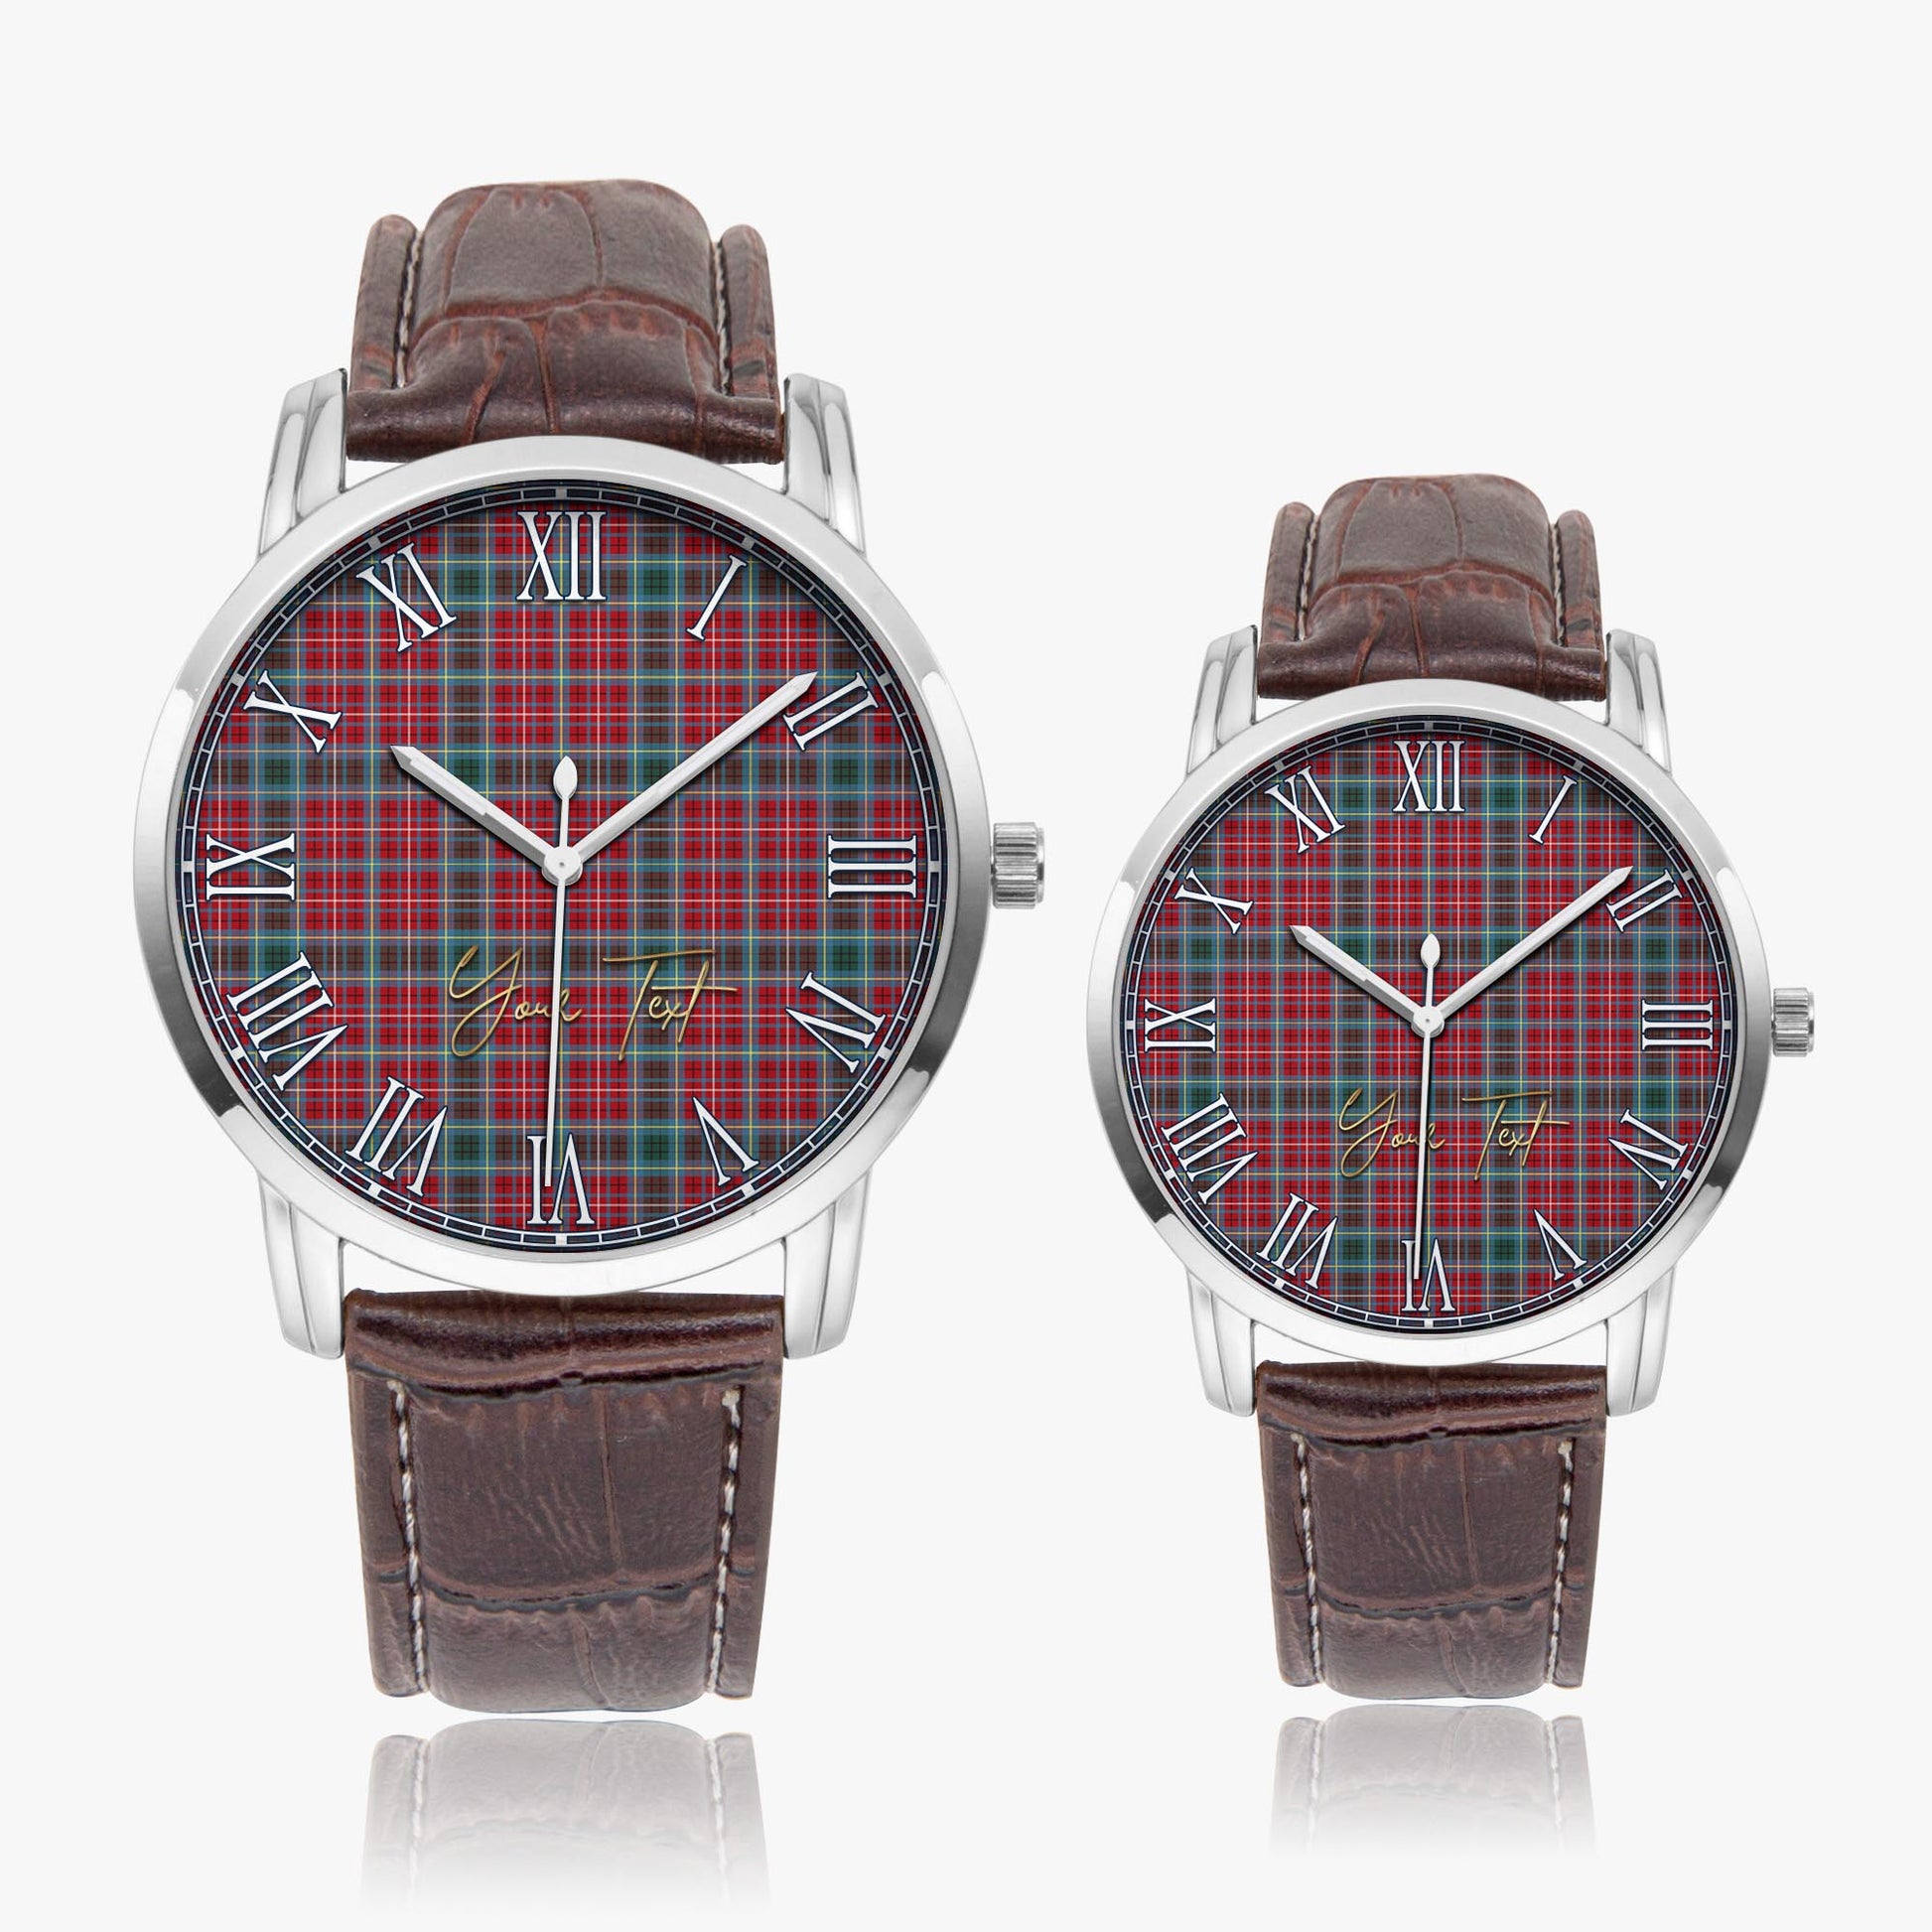 British Columbia Province Canada Tartan Personalized Your Text Leather Trap Quartz Watch Wide Type Silver Case With Brown Leather Strap - Tartanvibesclothing